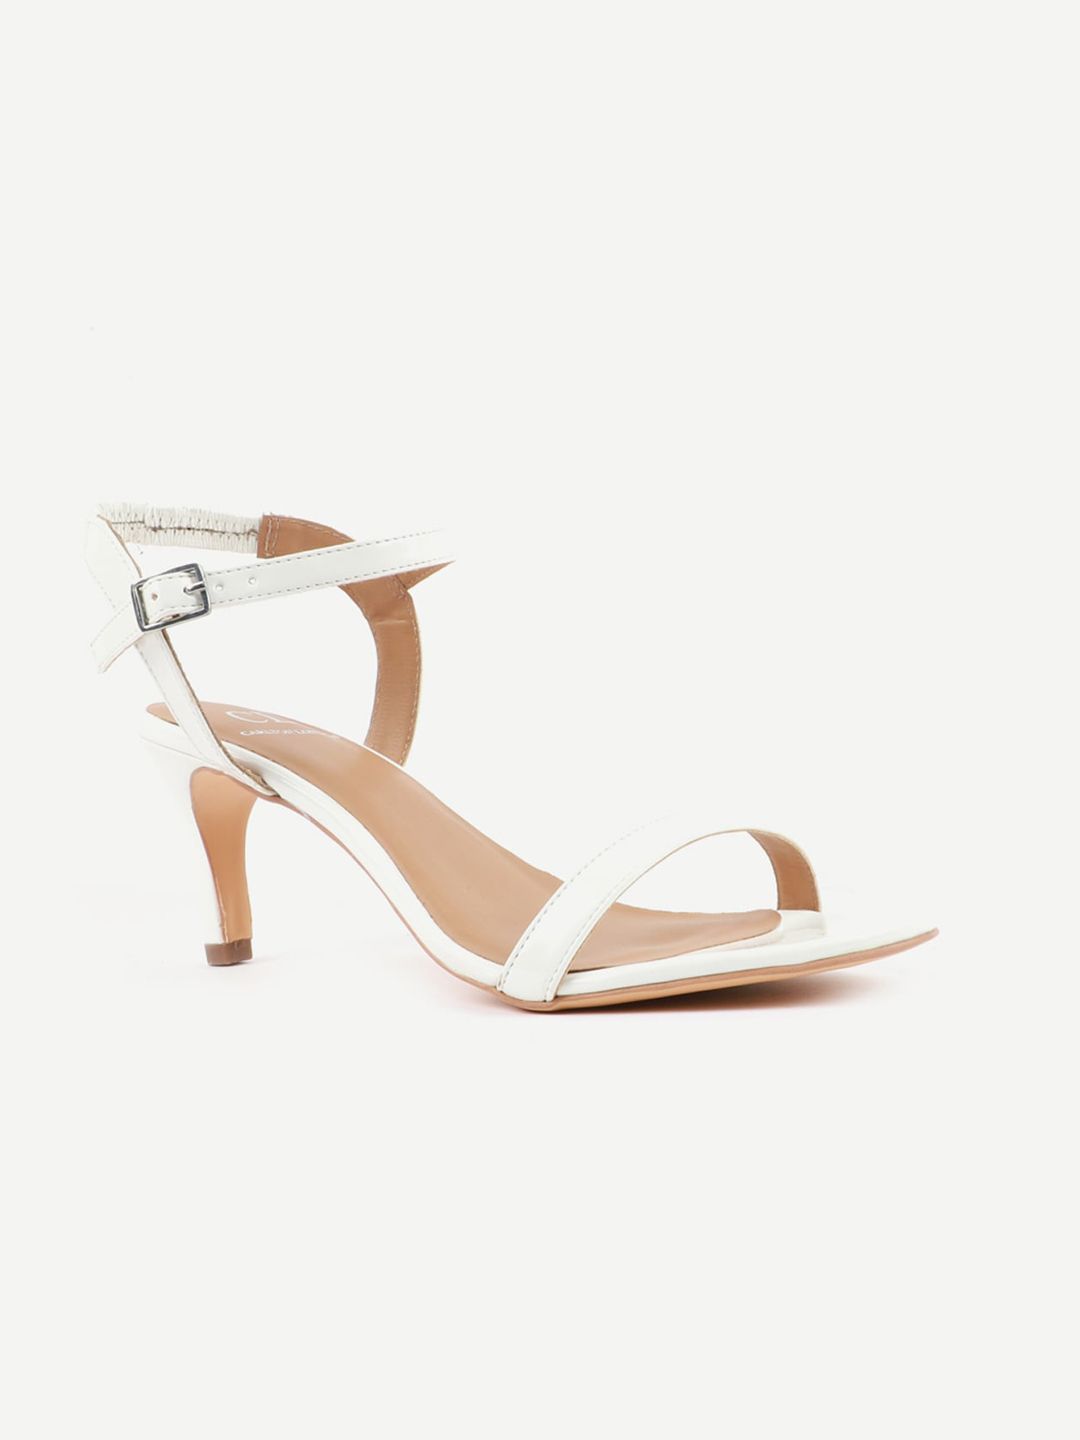 Carlton London White Stiletto Pumps with Buckles Price in India